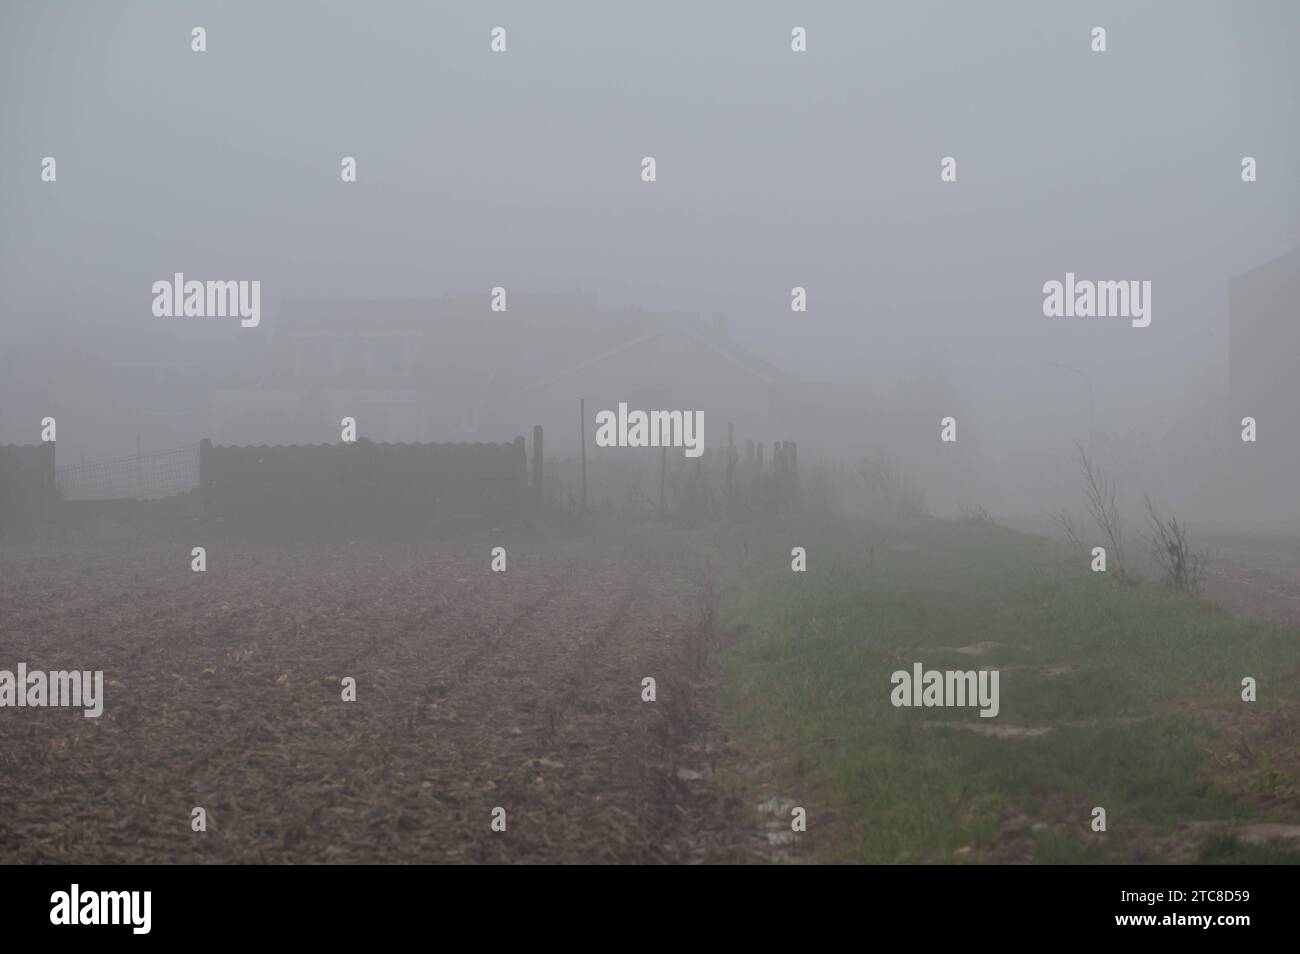 Foggy view over harvested corn fields and gardens at the Flemish countryside around Dilbeek, Brabant, Belgium Credit: Imago/Alamy Live News Stock Photo